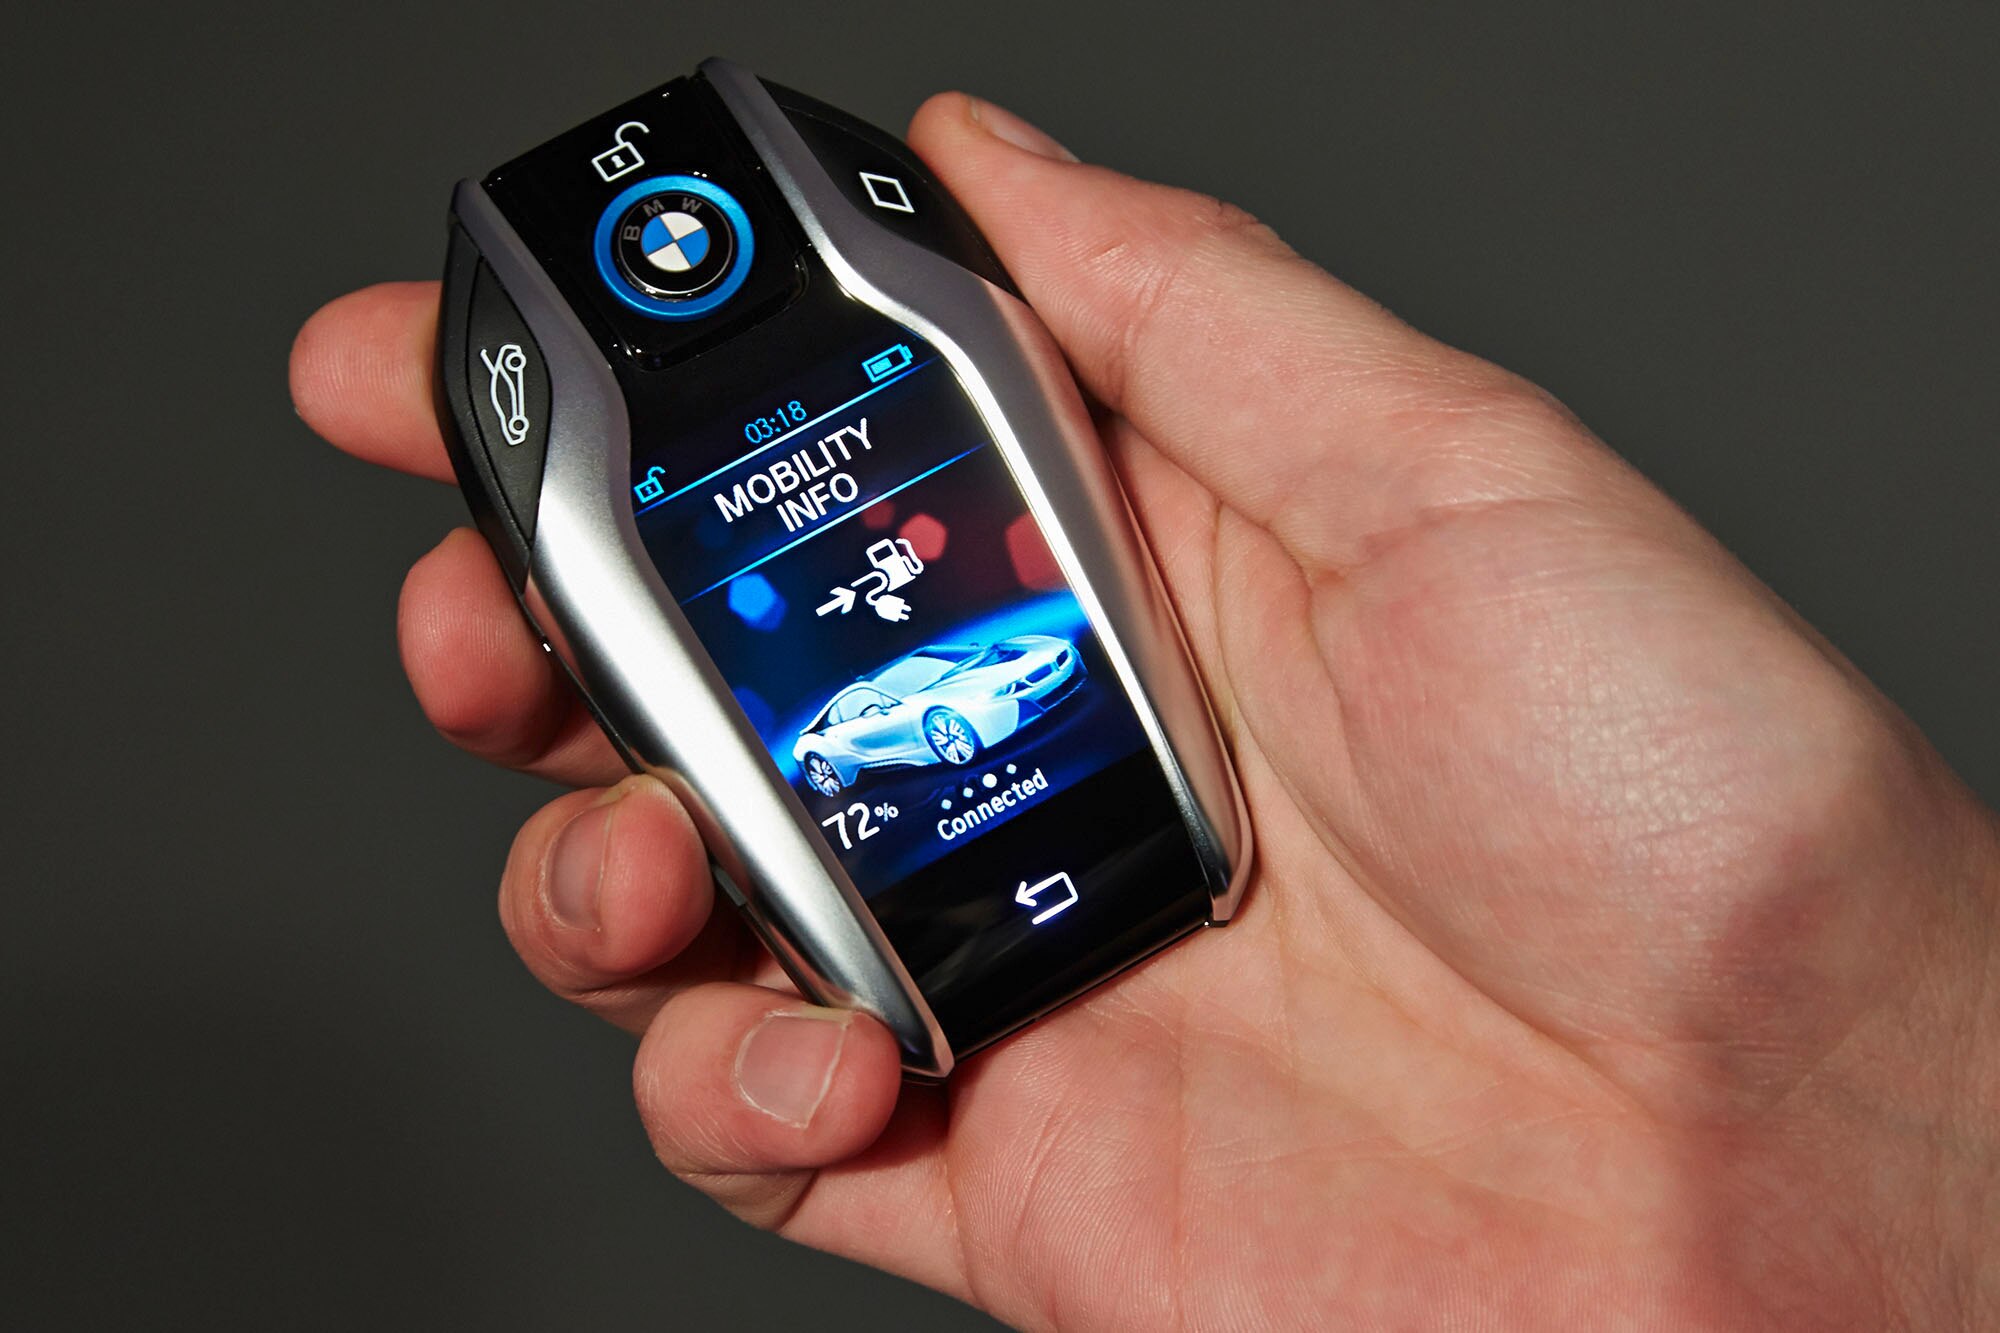 A BMW key fob with an LCD screen